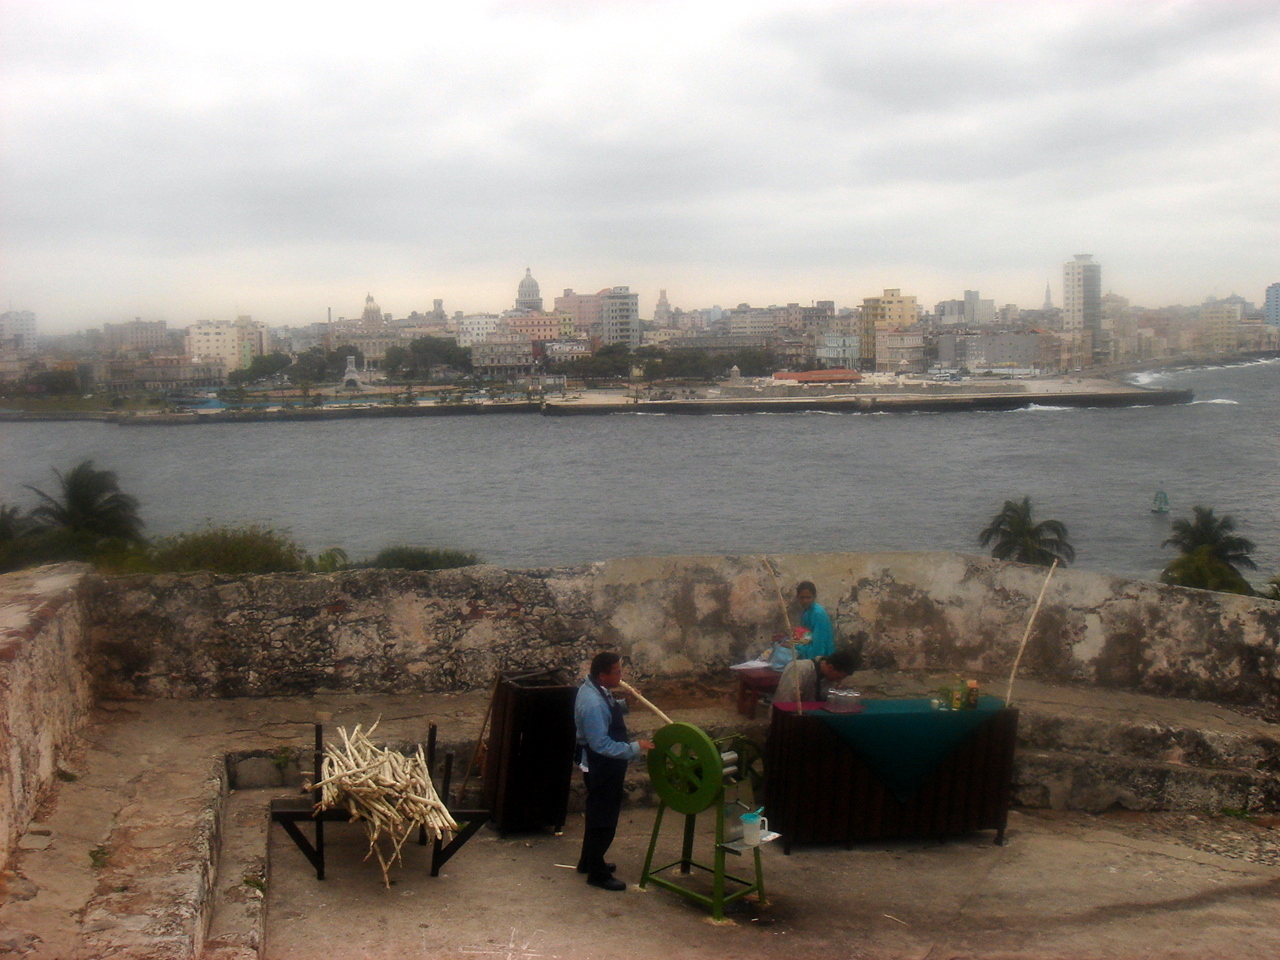 sugar cane juice-making at the old Fort, with Habana in the distance